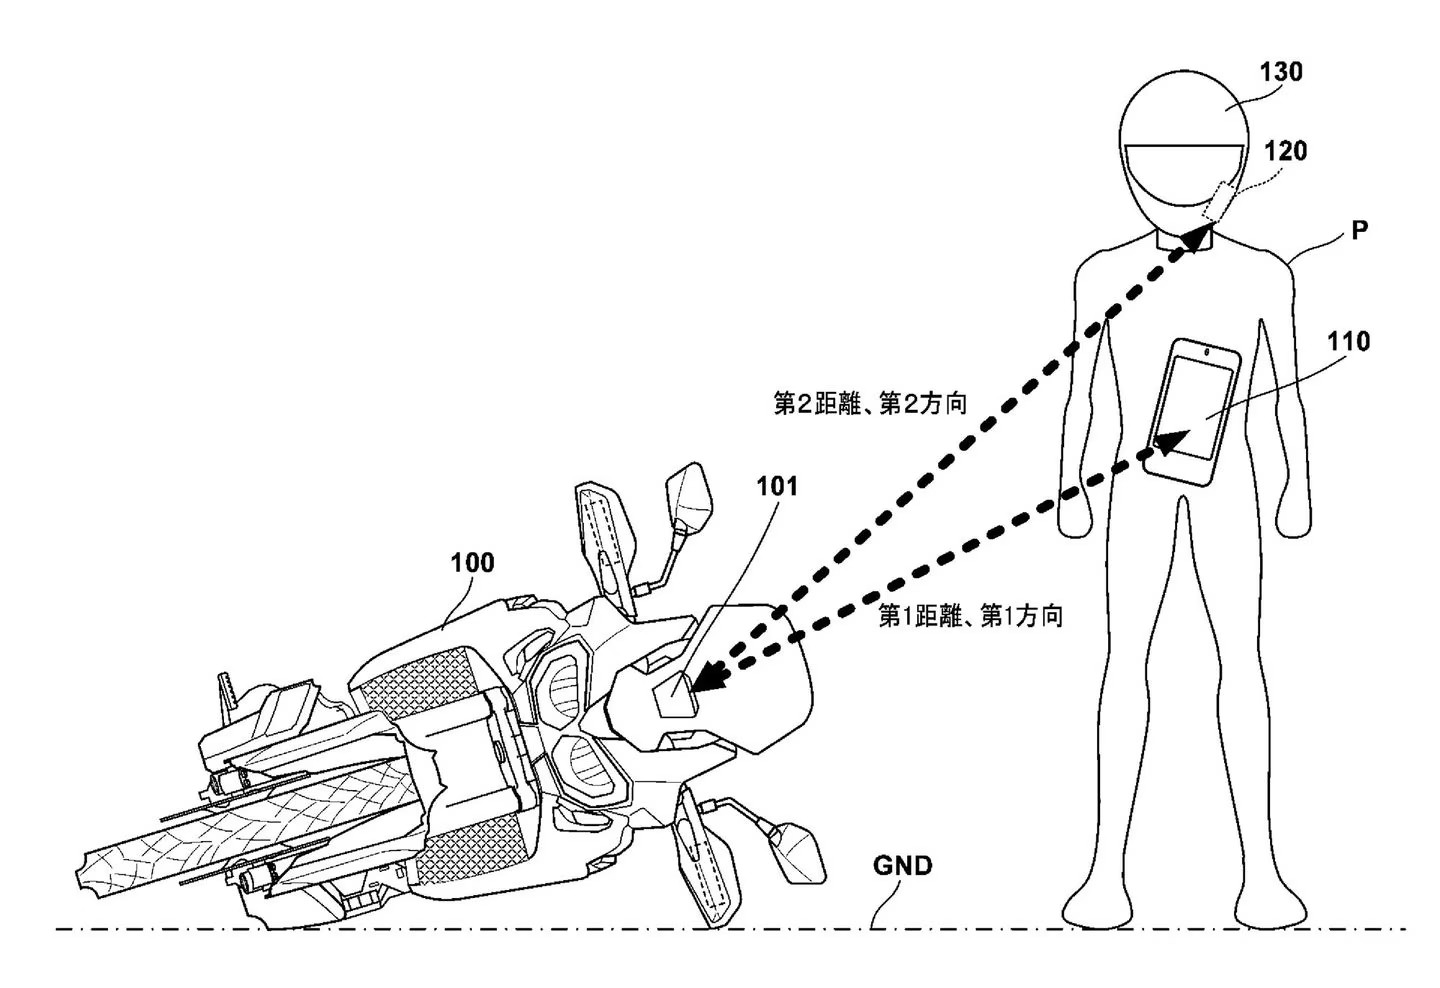 Okay situation from Honda's patent application